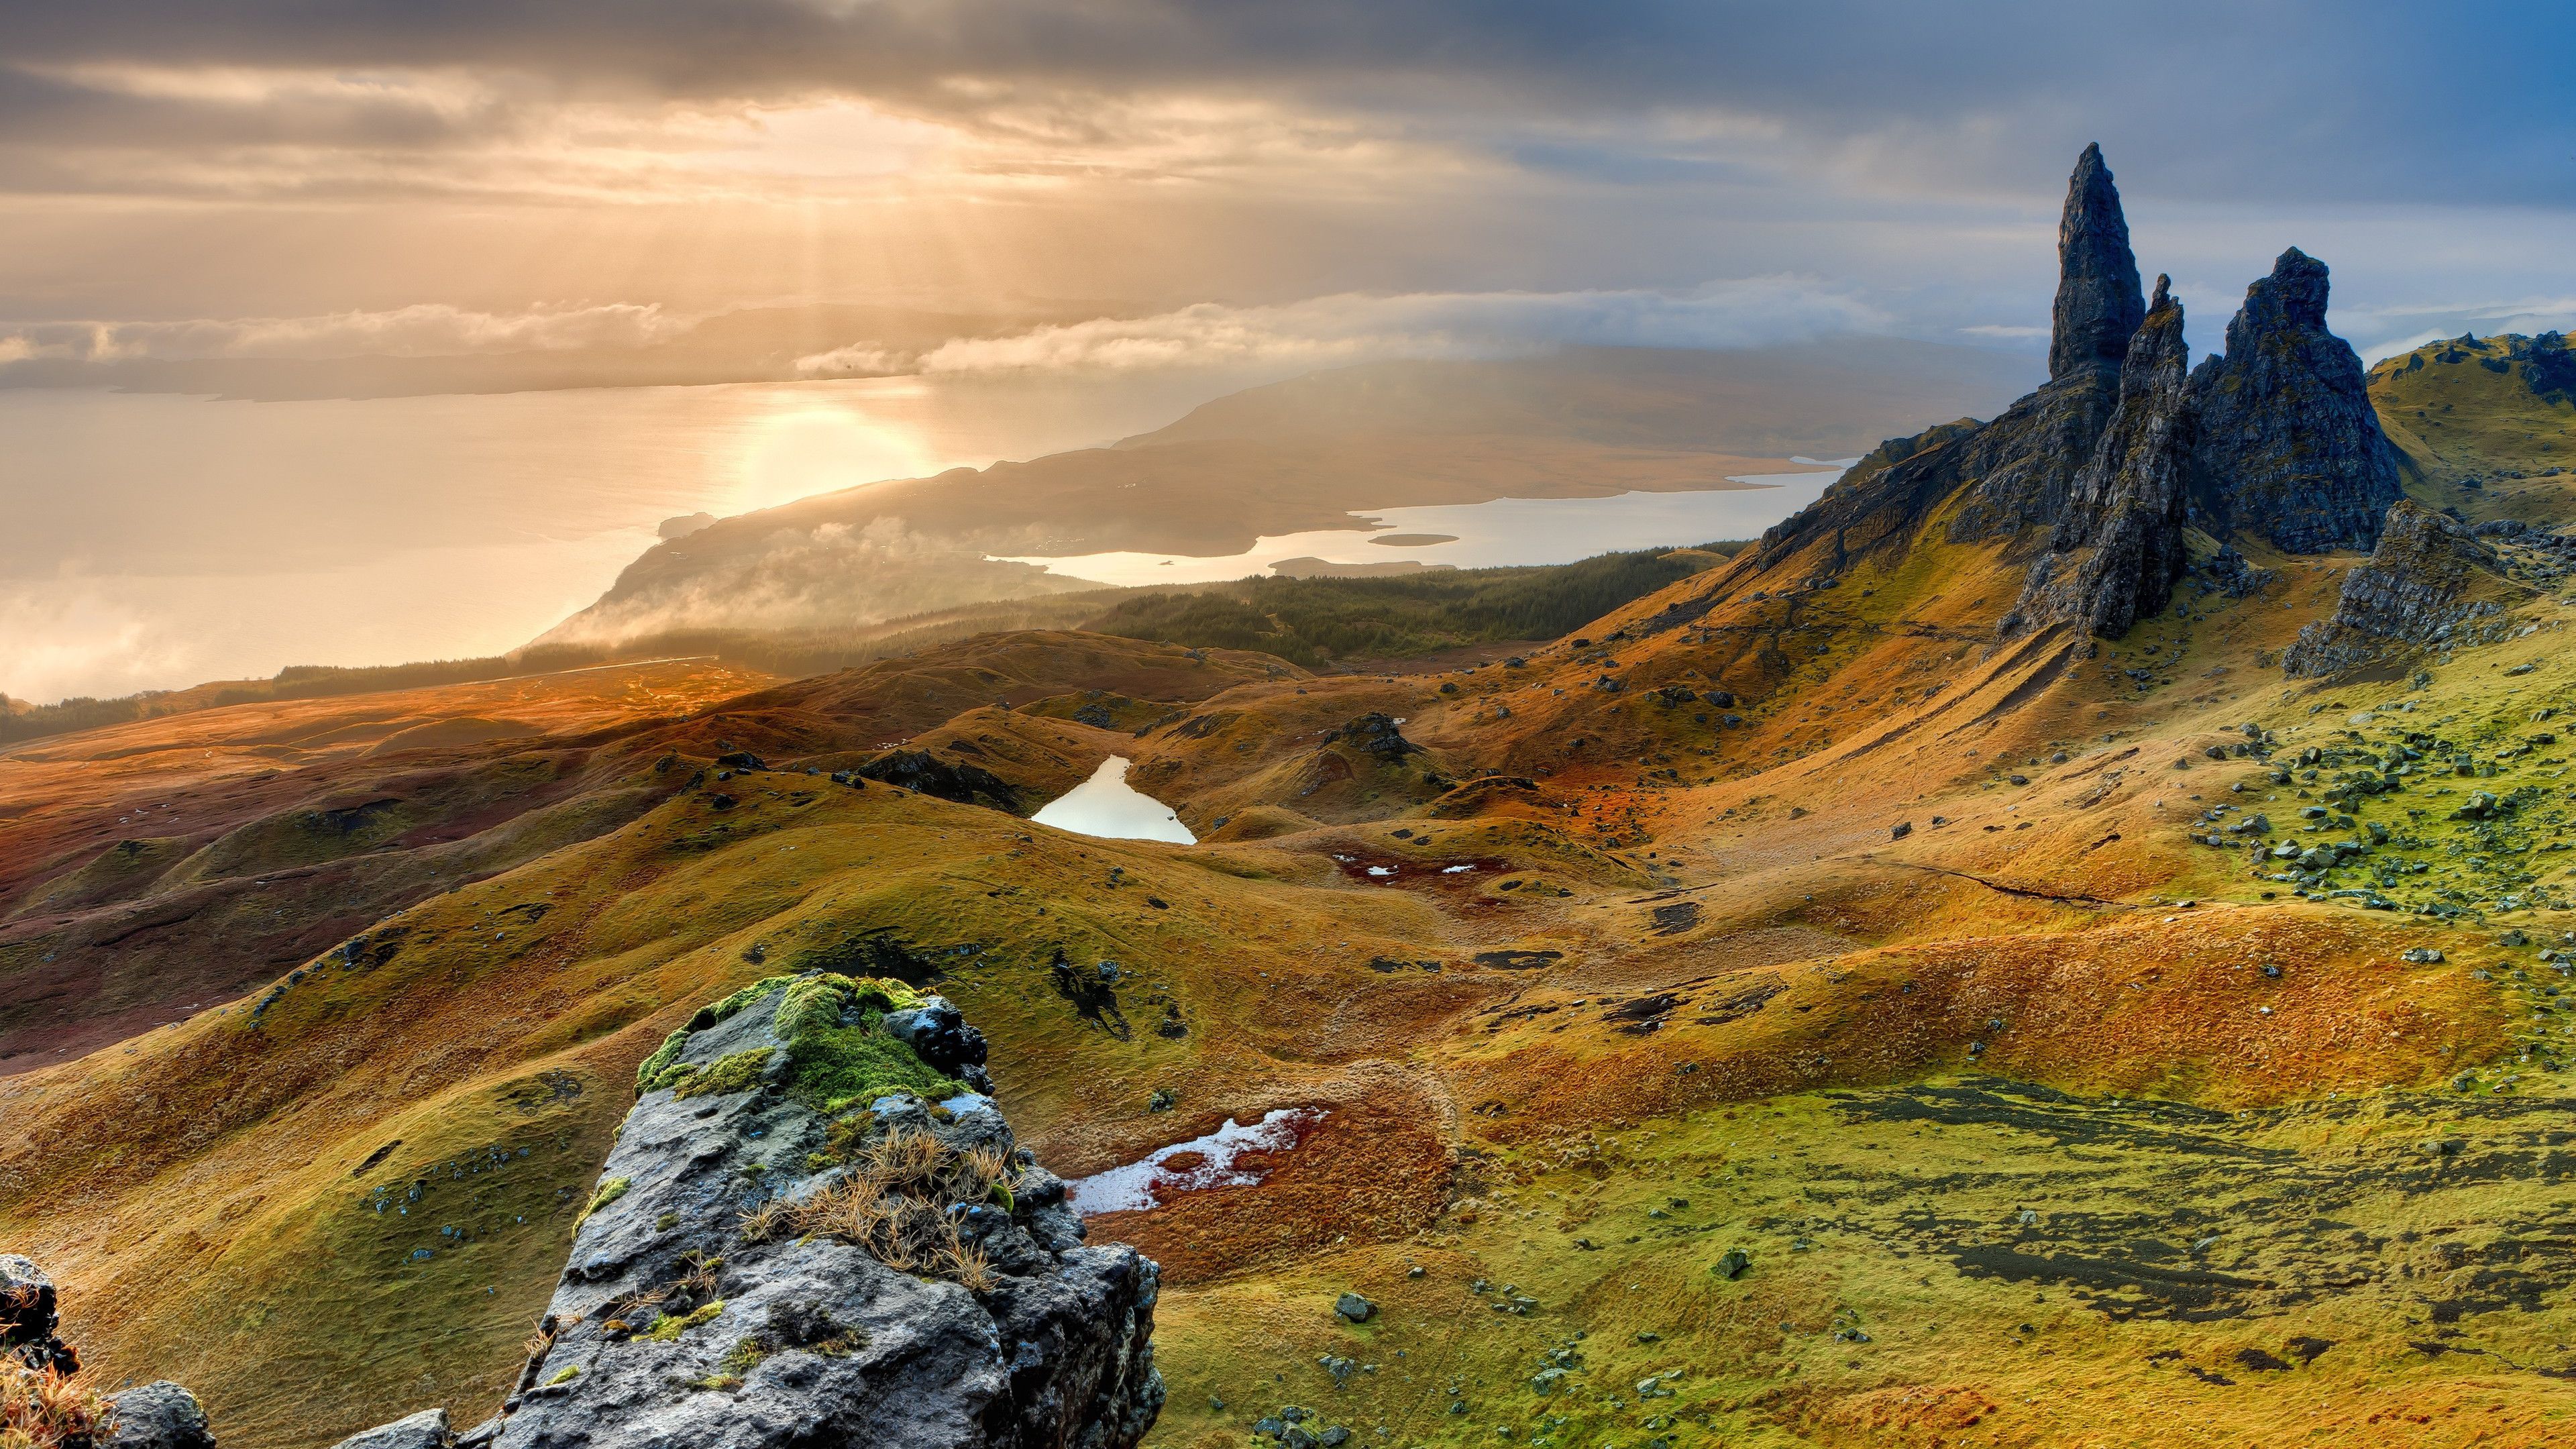 Scottish Highlands Mountain In The United Kingdom Mountain Region In Northwest Scotland Wallpaper High Resolution For Android iPhone And Computers 3840x2160, Wallpaper13.com